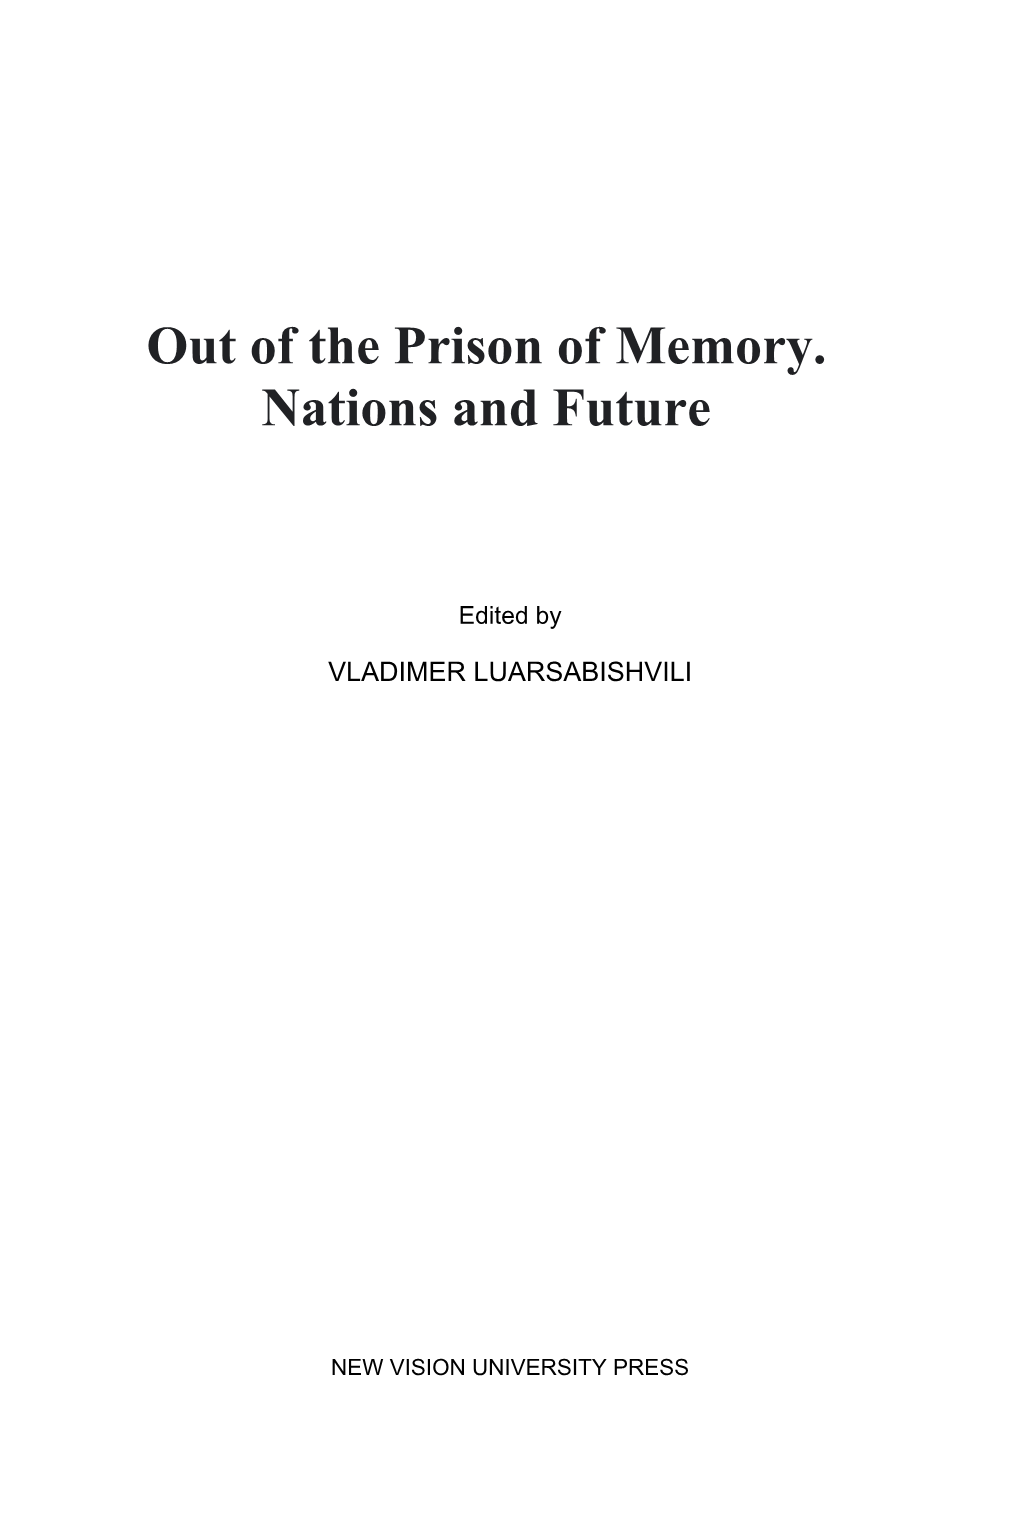 Out of the Prison of Memory. Nations and Future